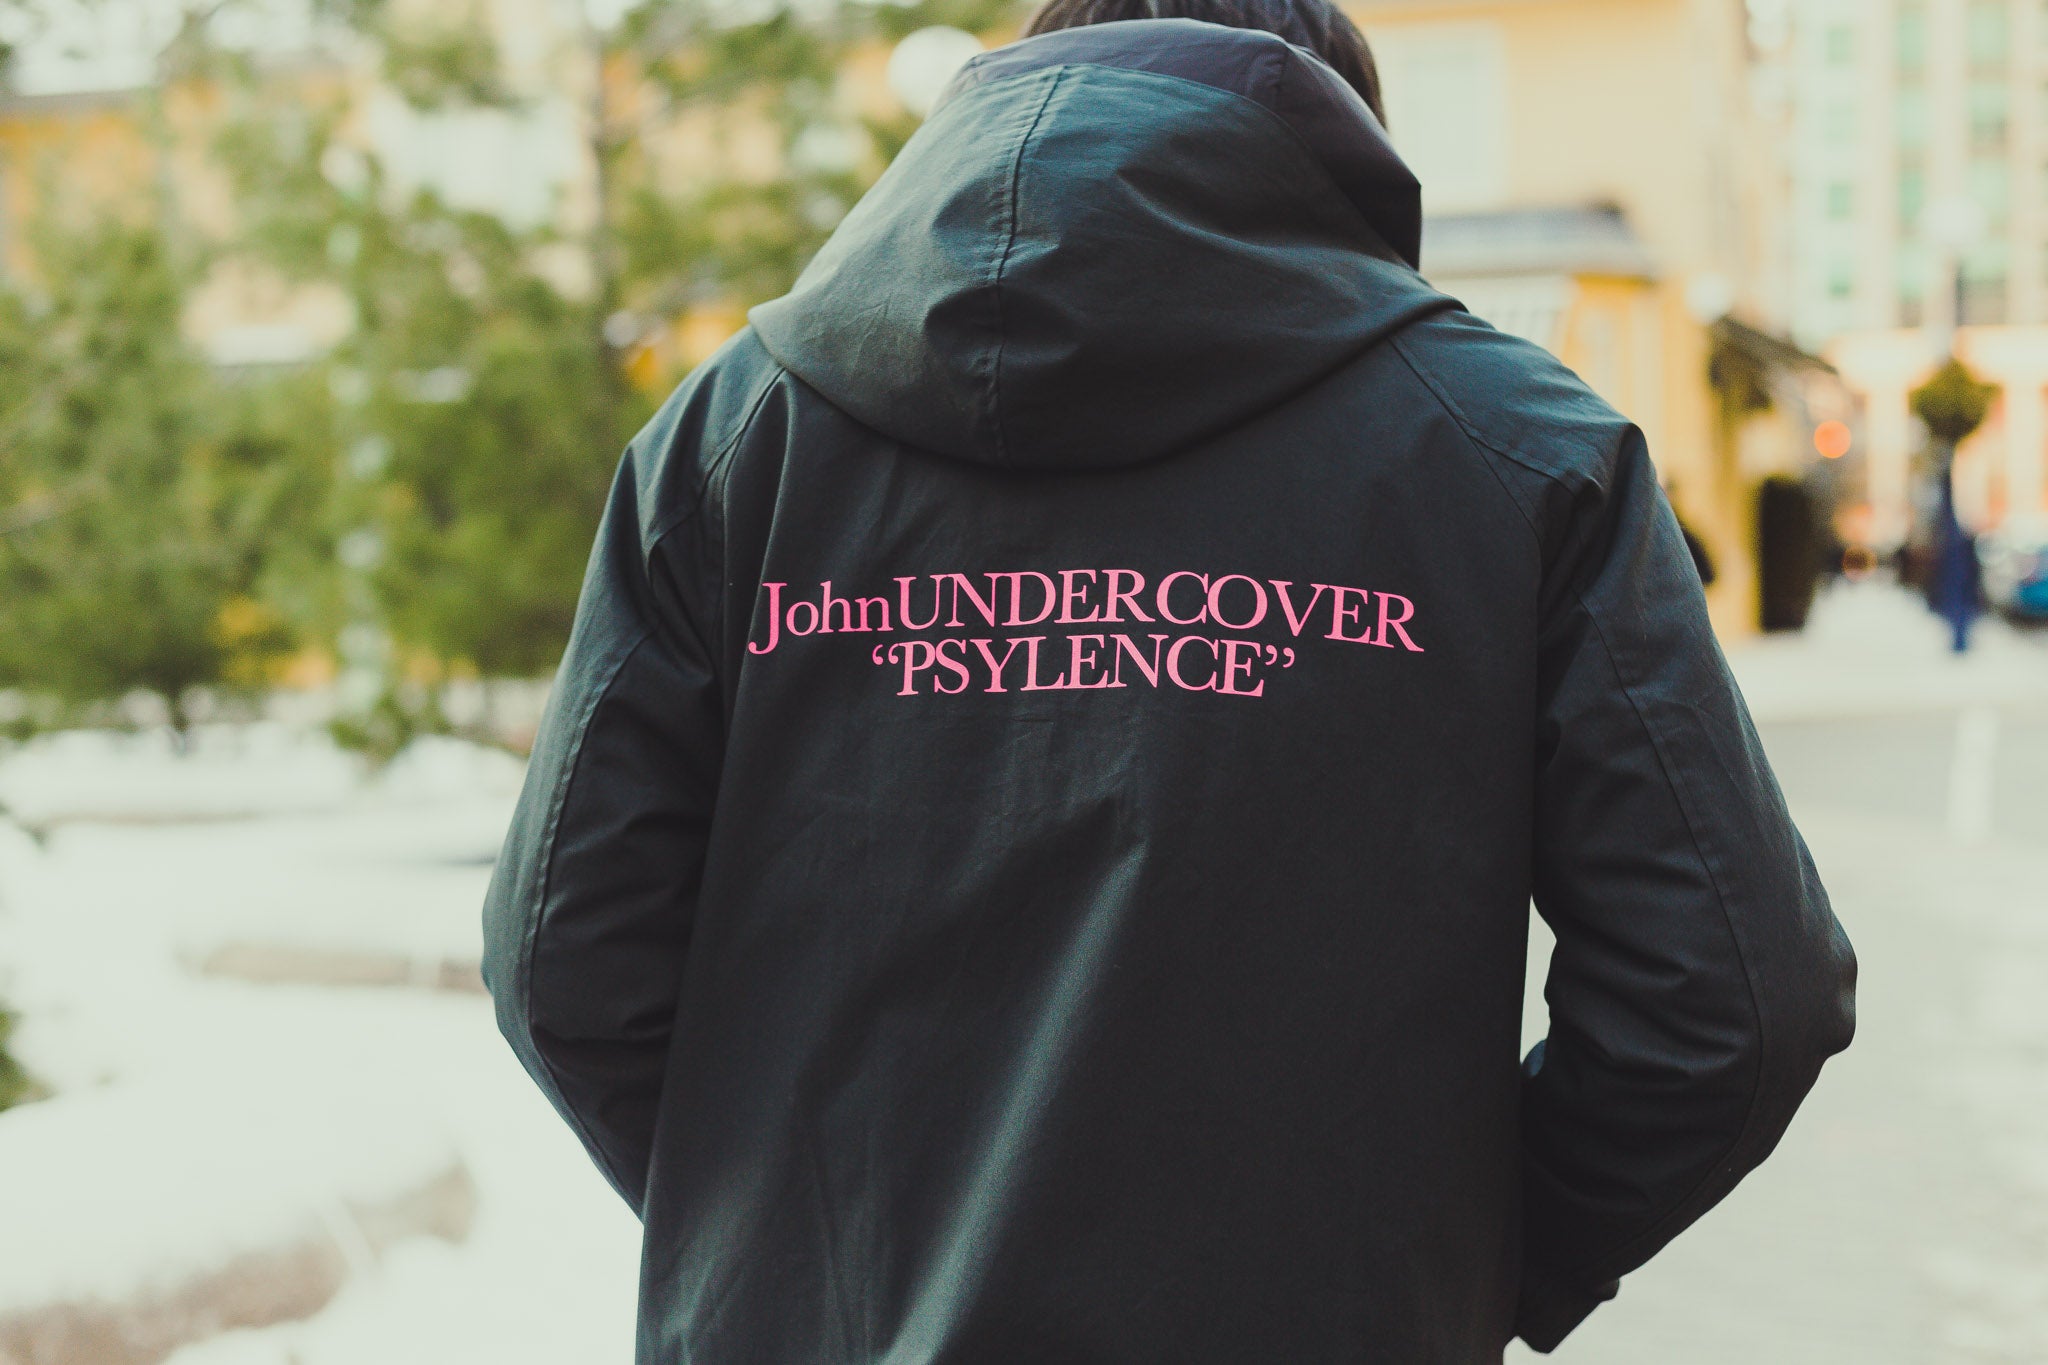 JohnUNDERCOVER SS18 Collection – Capsule